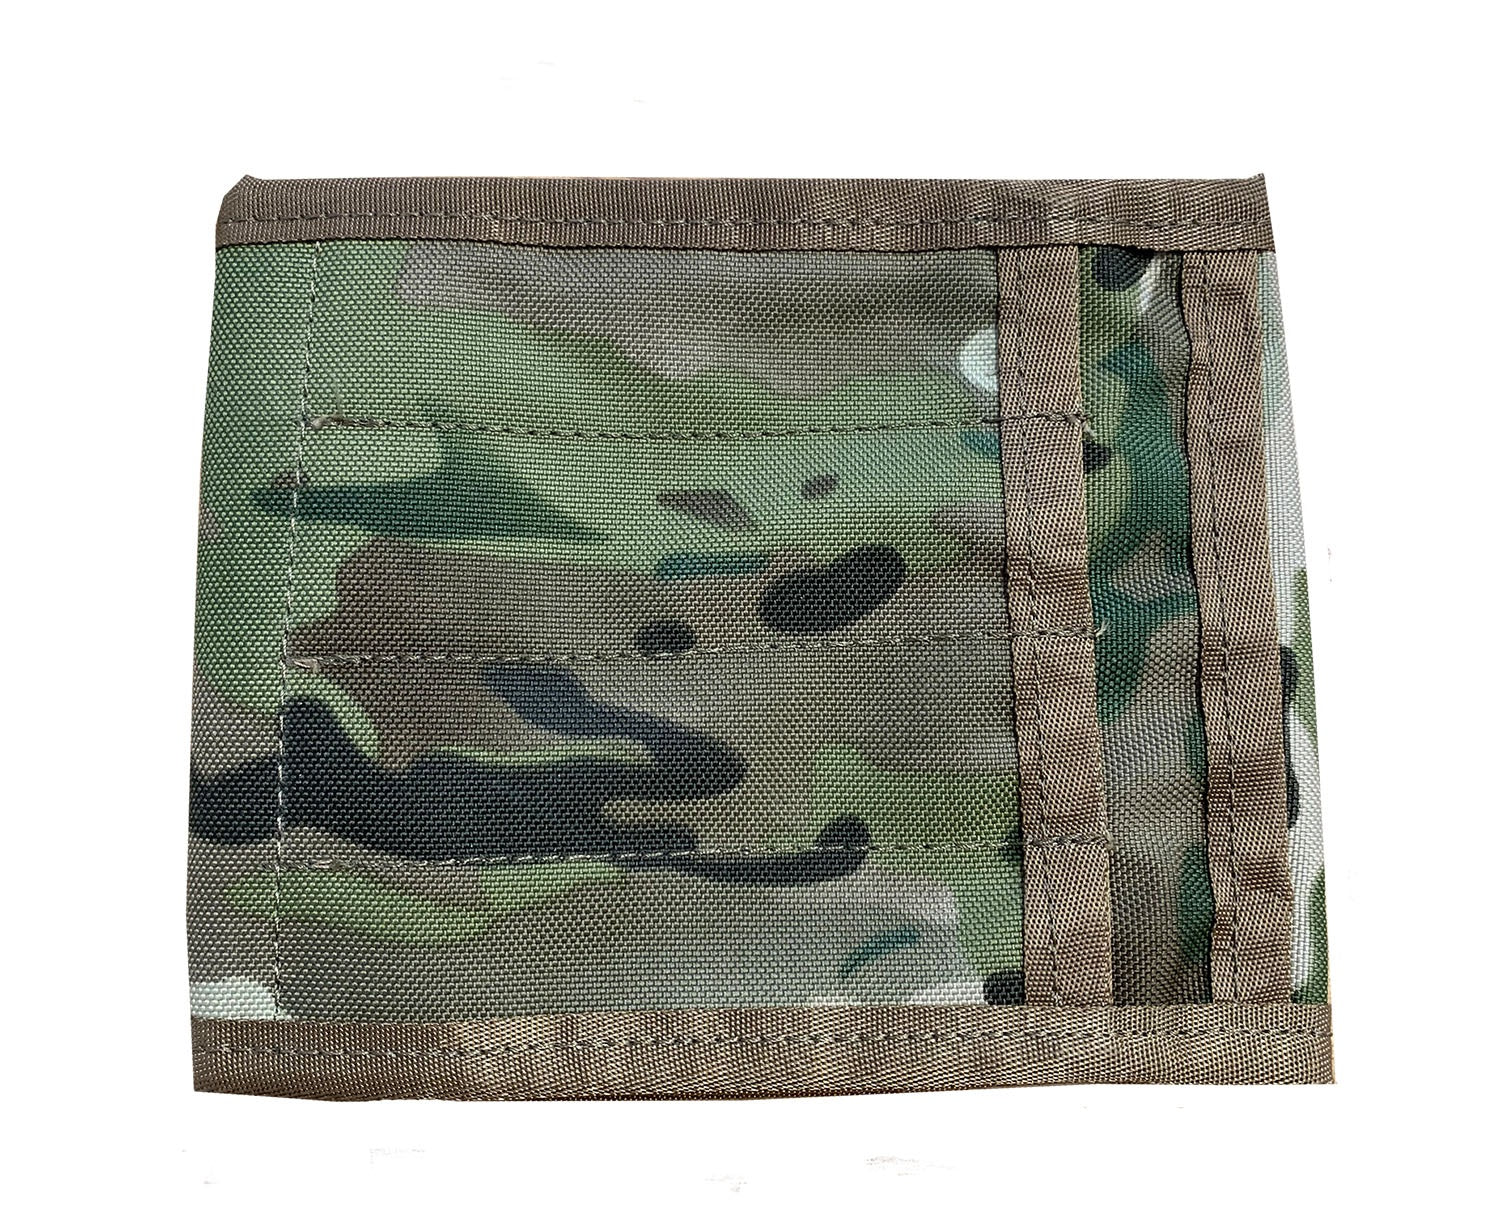 Made from heavy duty 900D fabric with dual coat waterproofing, this standard military issue sized wallet is a tough cookie  It is compatible with both the 20 & 40 page viewee Twoee and features a velcro closure with slots for pens and pencils  Great for military use, scouts, cadets, hikers or even for fishing and hunting documents as you can keep all your maps, guides, pens and pencils together